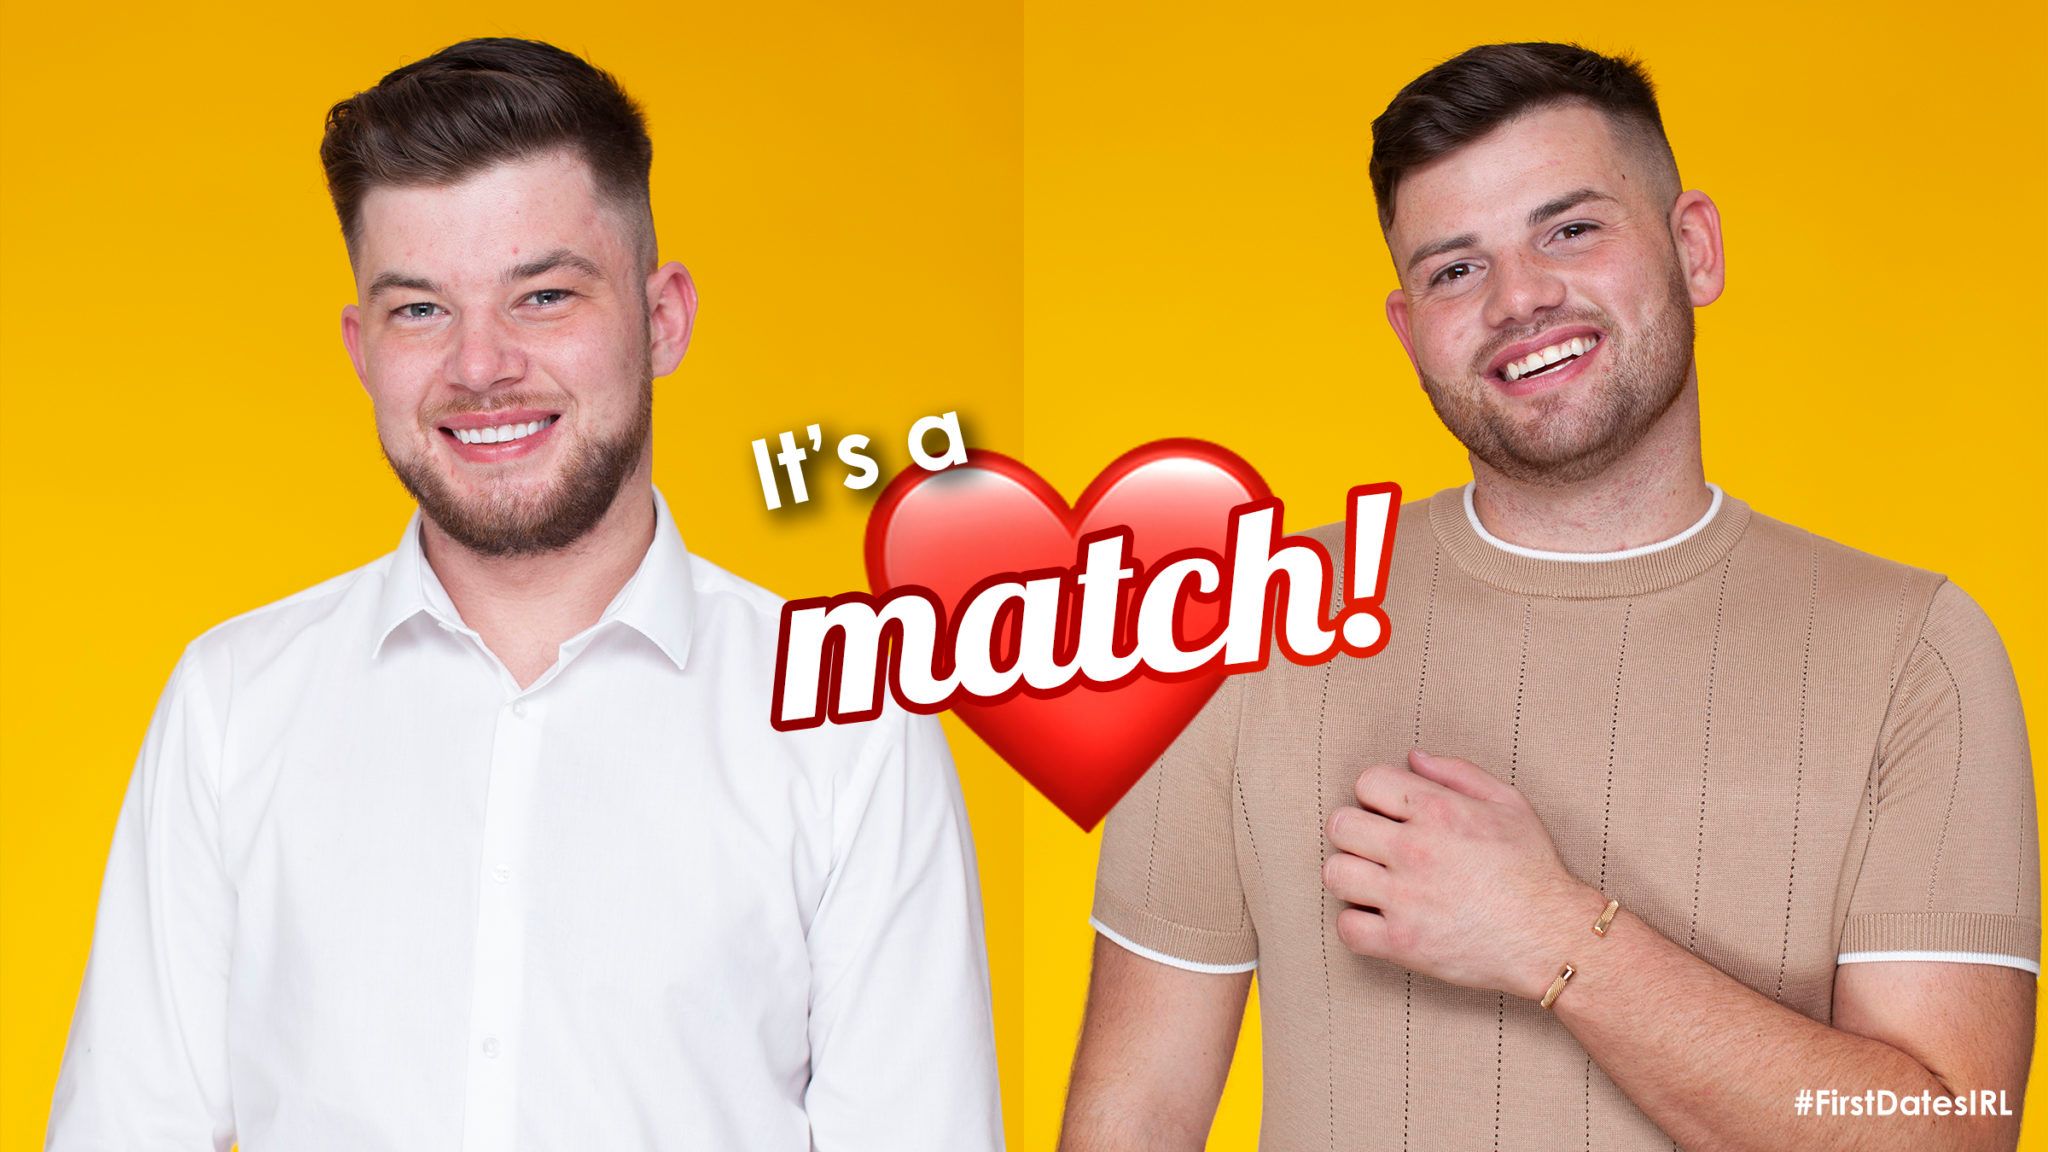 First Dates Ireland viewers thought this one couple looked exactly like each other